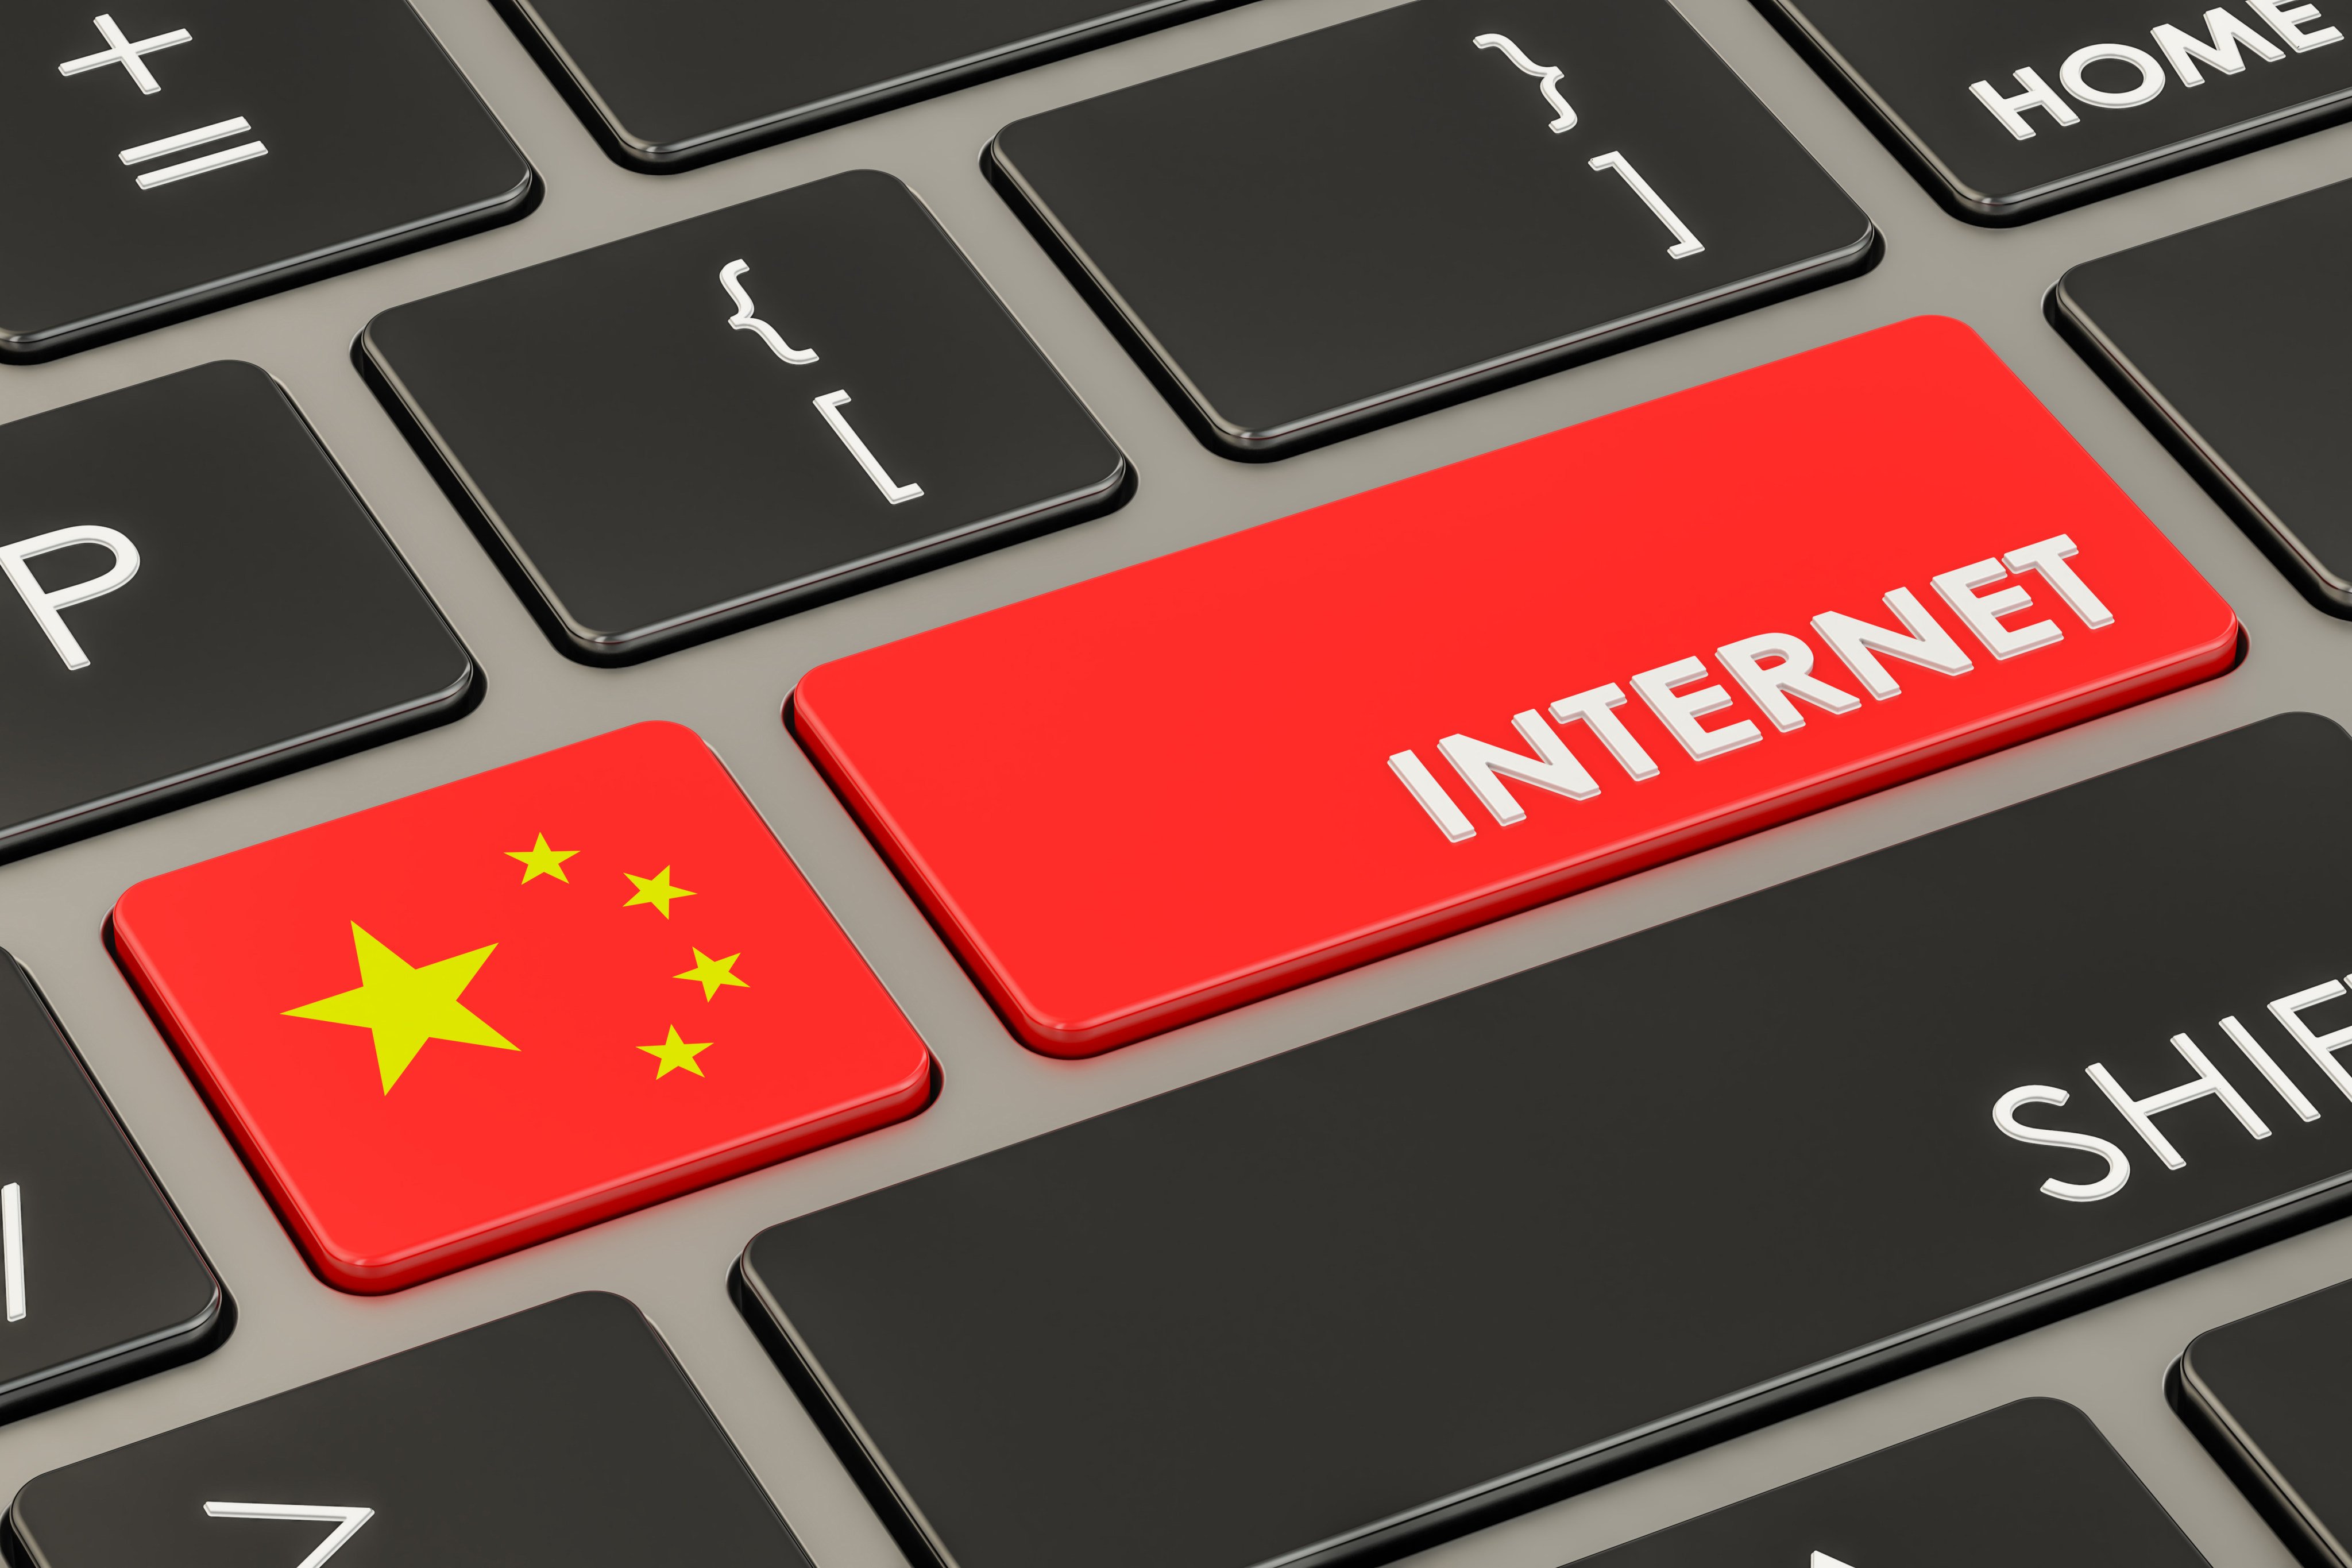 China’s first connection to the global internet happened on April 20, 1994. Photo: Shutterstock Images